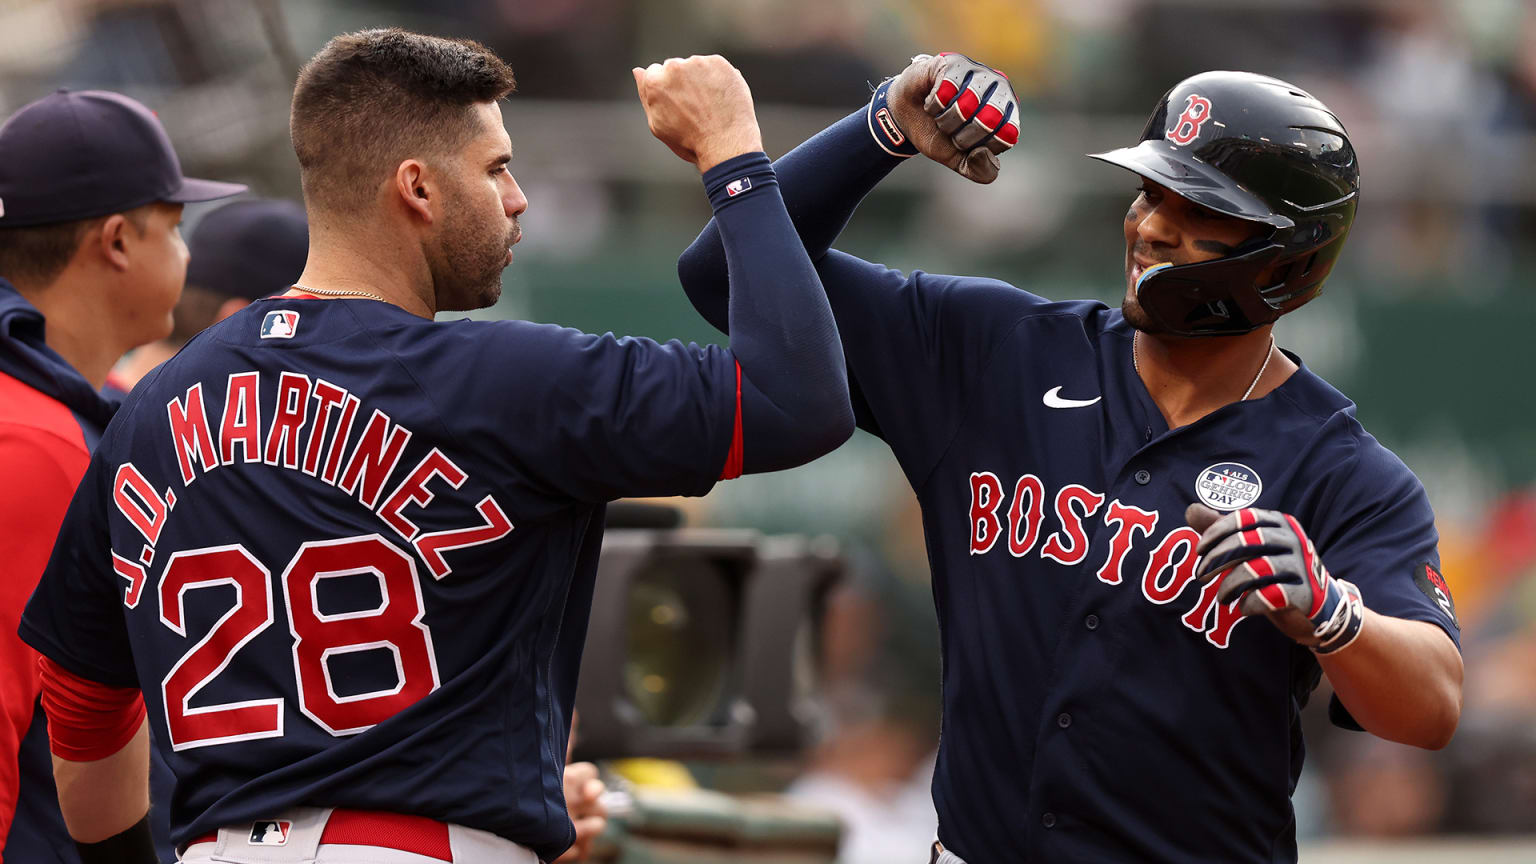 Red Sox J.D. Martinez and Xander Bogaerts bash forearms